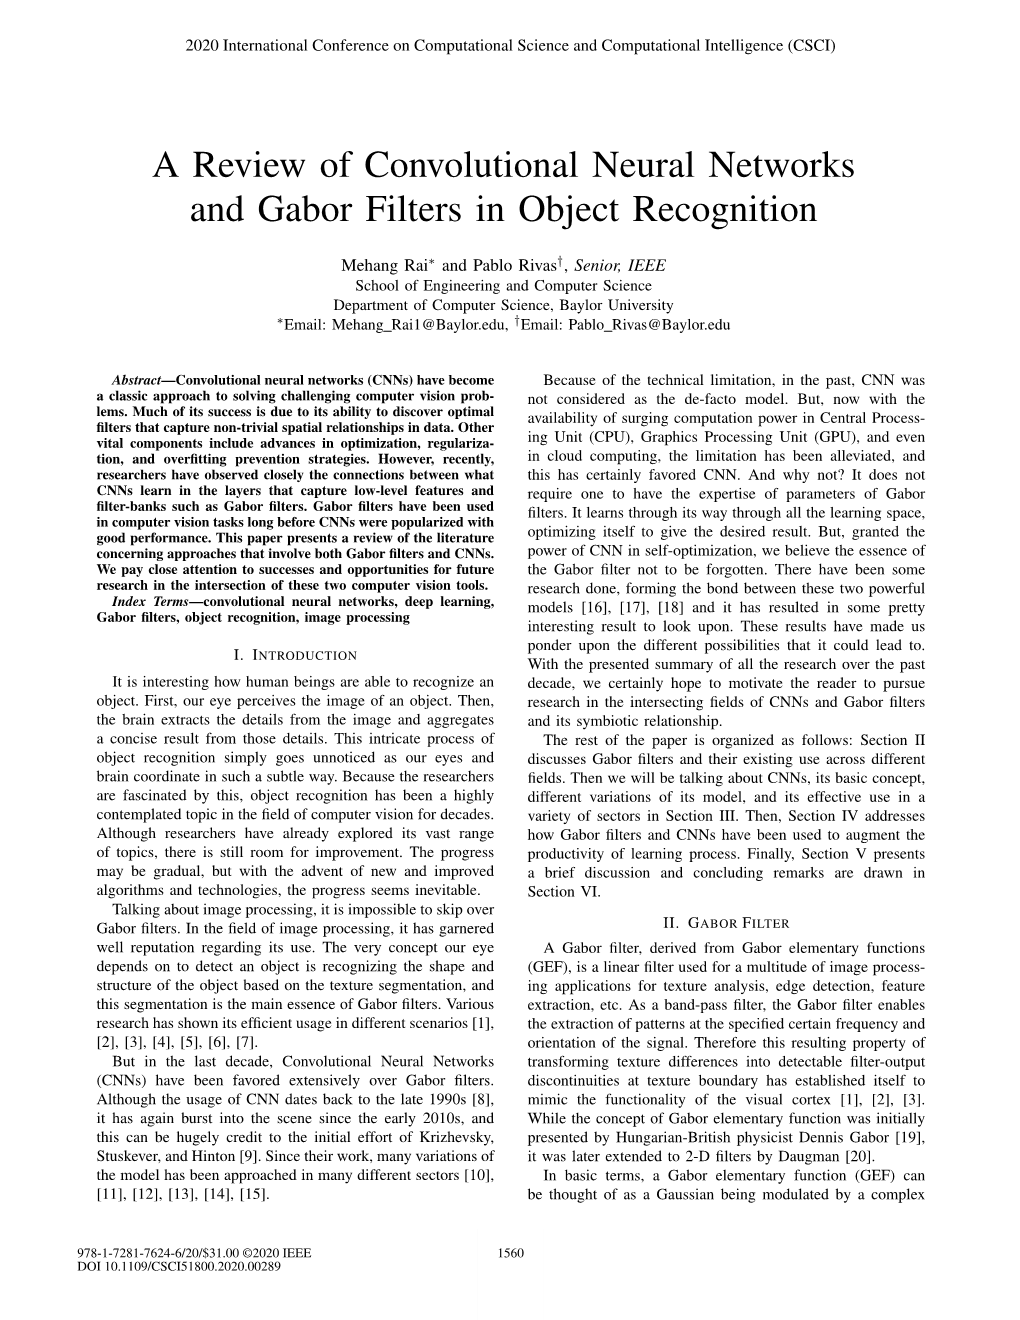 A Review of Convolutional Neural Networks and Gabor Filters in Object Recognition